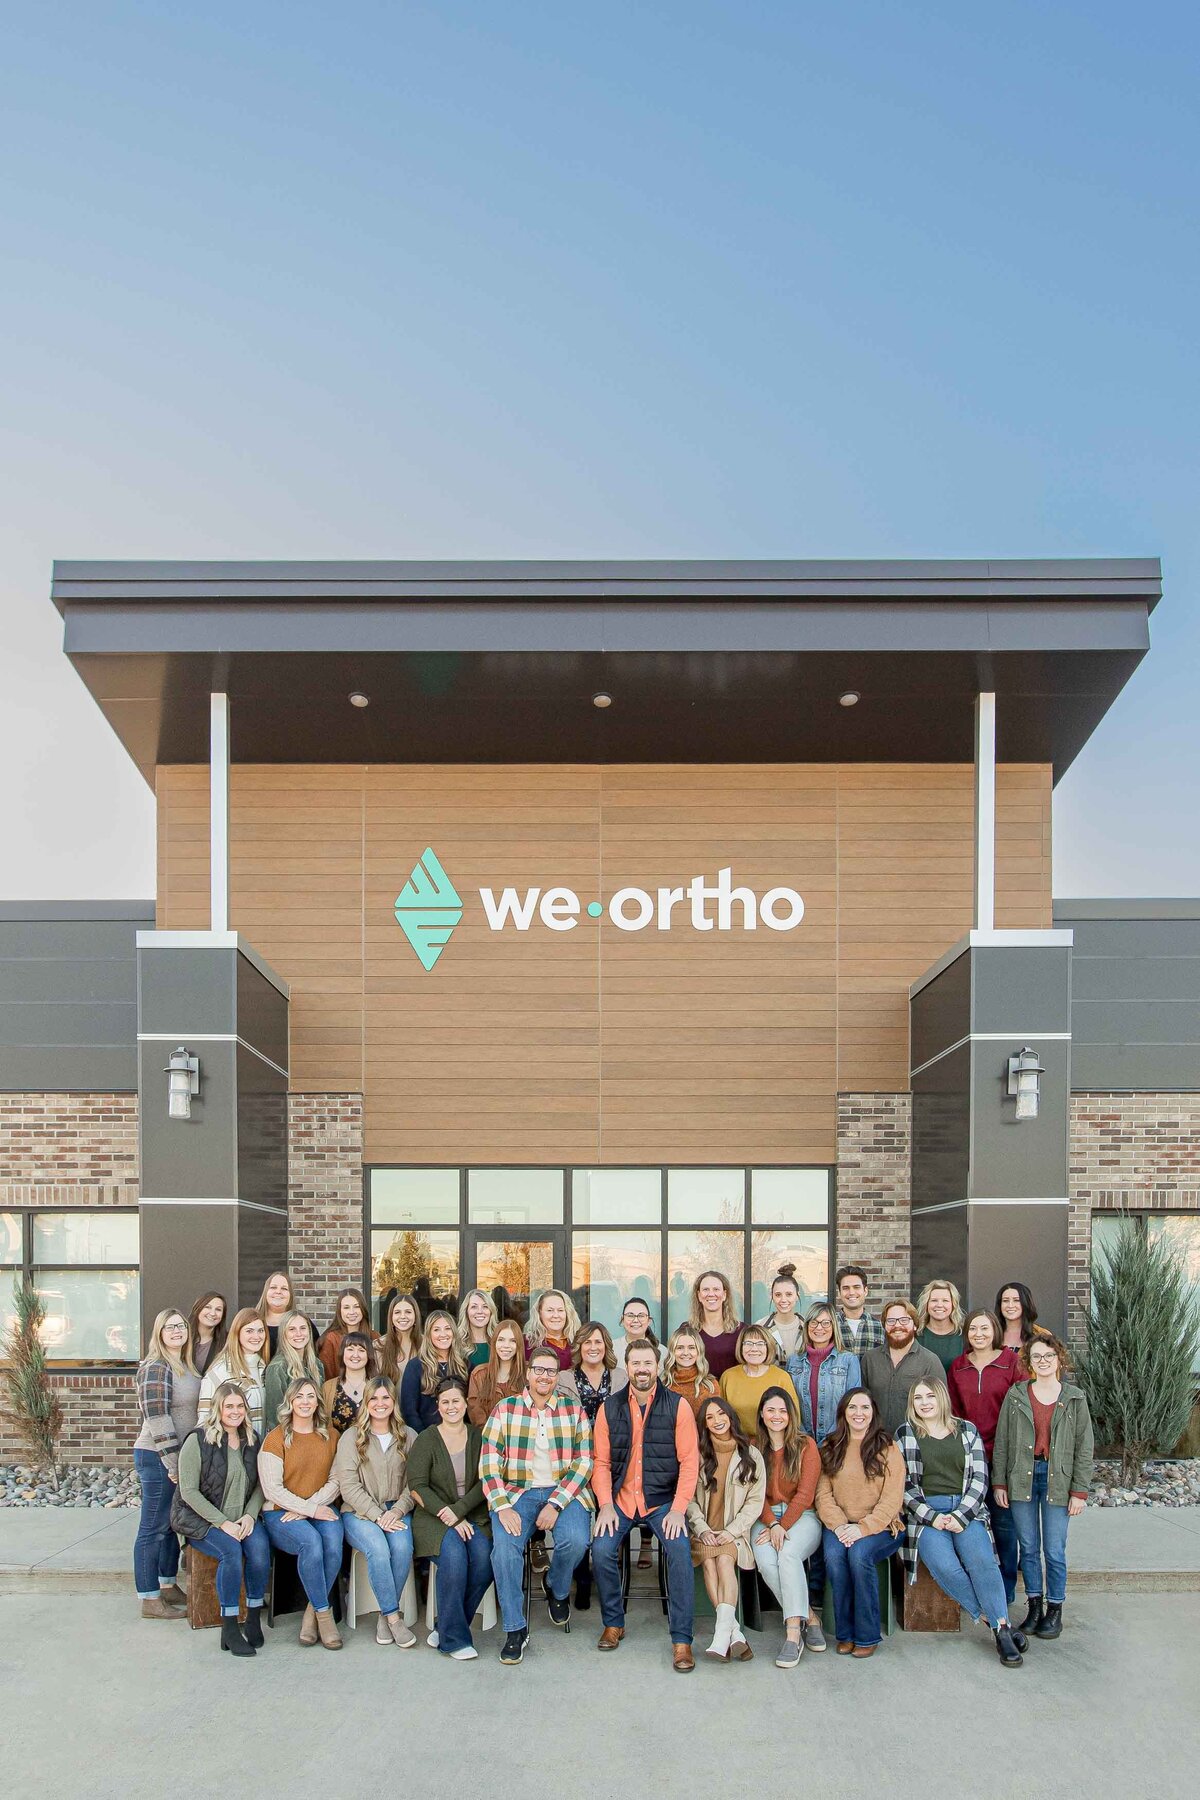 staff members in front of an orthodontist building